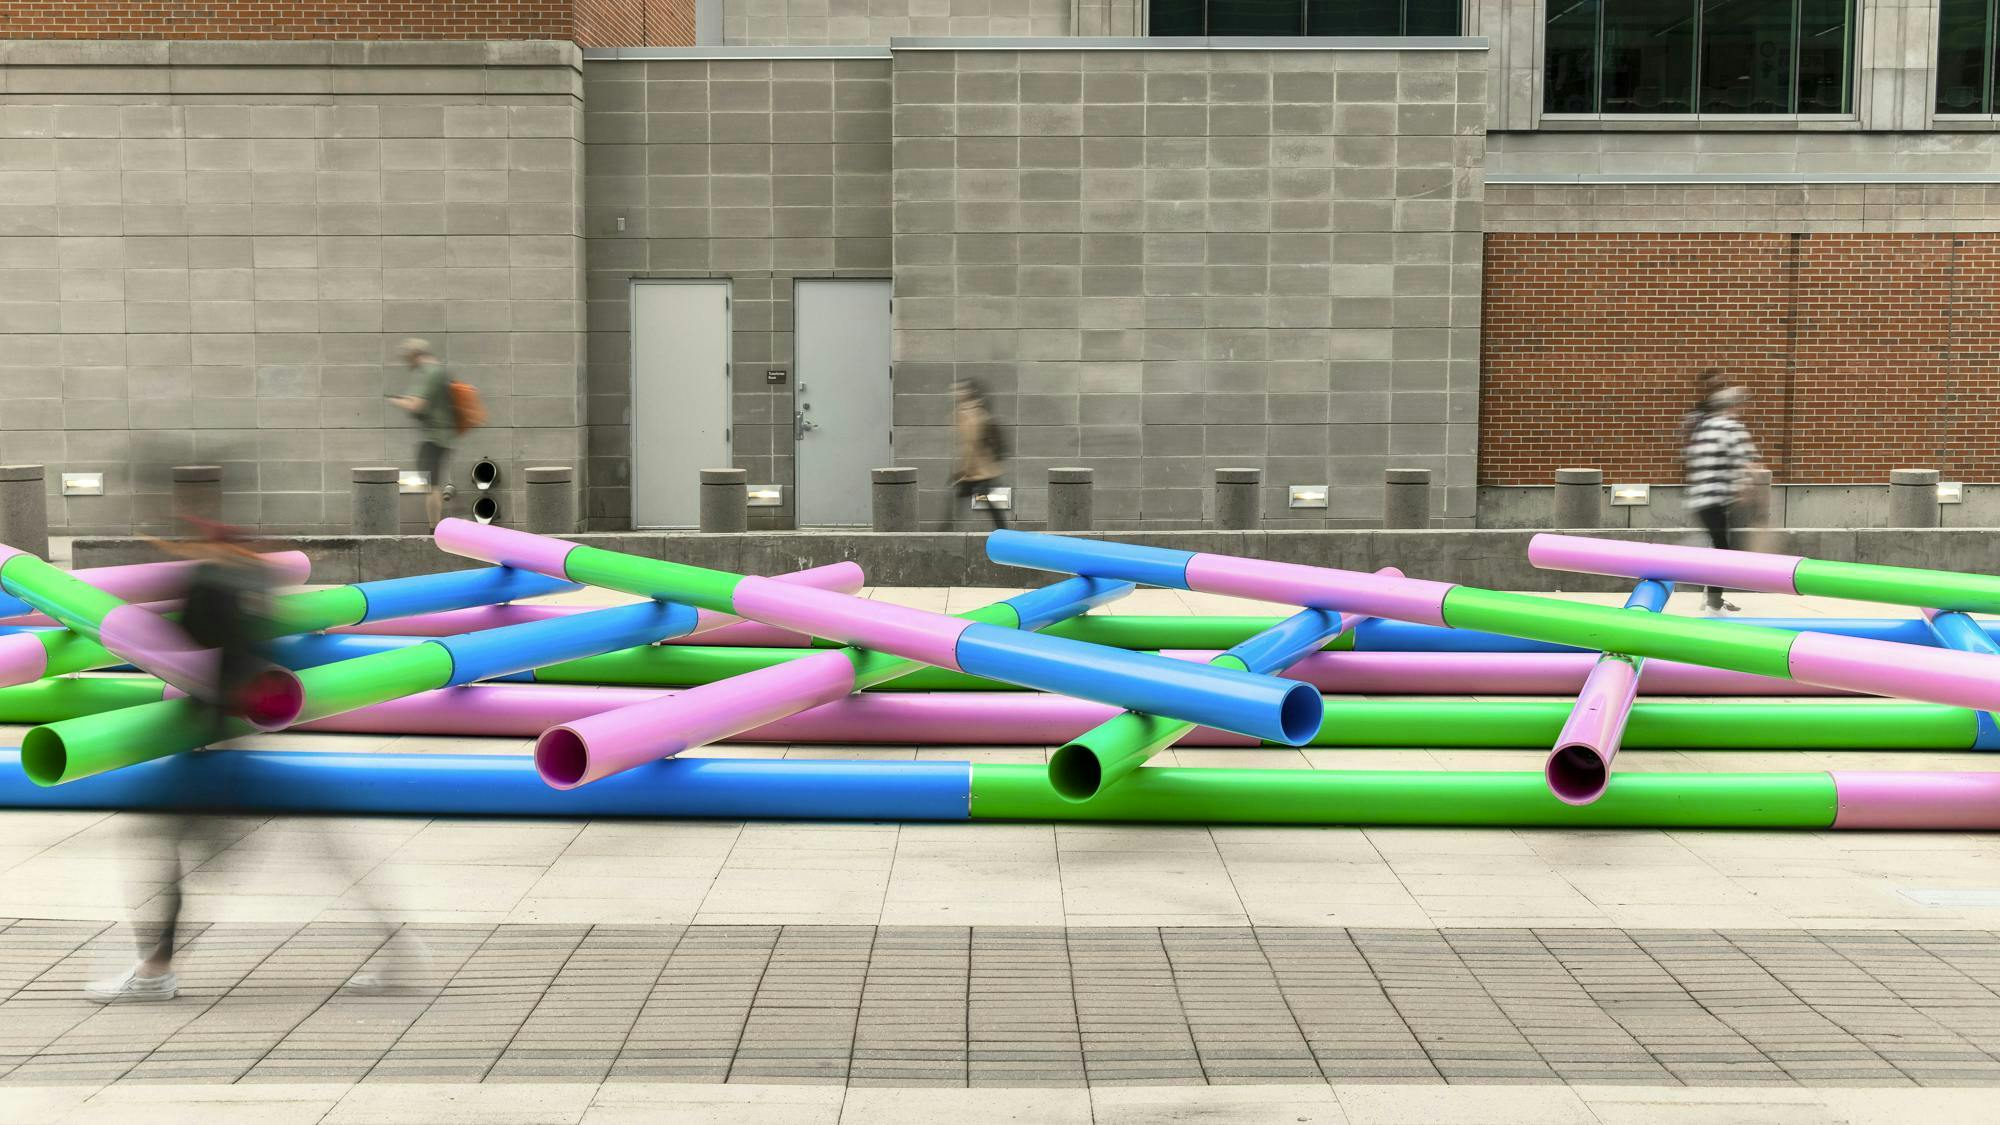 Julia Jamrozik and Coryn Kempster, Pipelines, 2023. Site-specific installation composed of PVC water and wastewater infrastructure pipes. Plaza of the Americas, Denver, Colorado. Presented by the Biennial of the Americas with artistic direction by Black Cube Nomadic Art Museum. Courtesy the artists and Black Cube. Photo: Third Dune Productions.